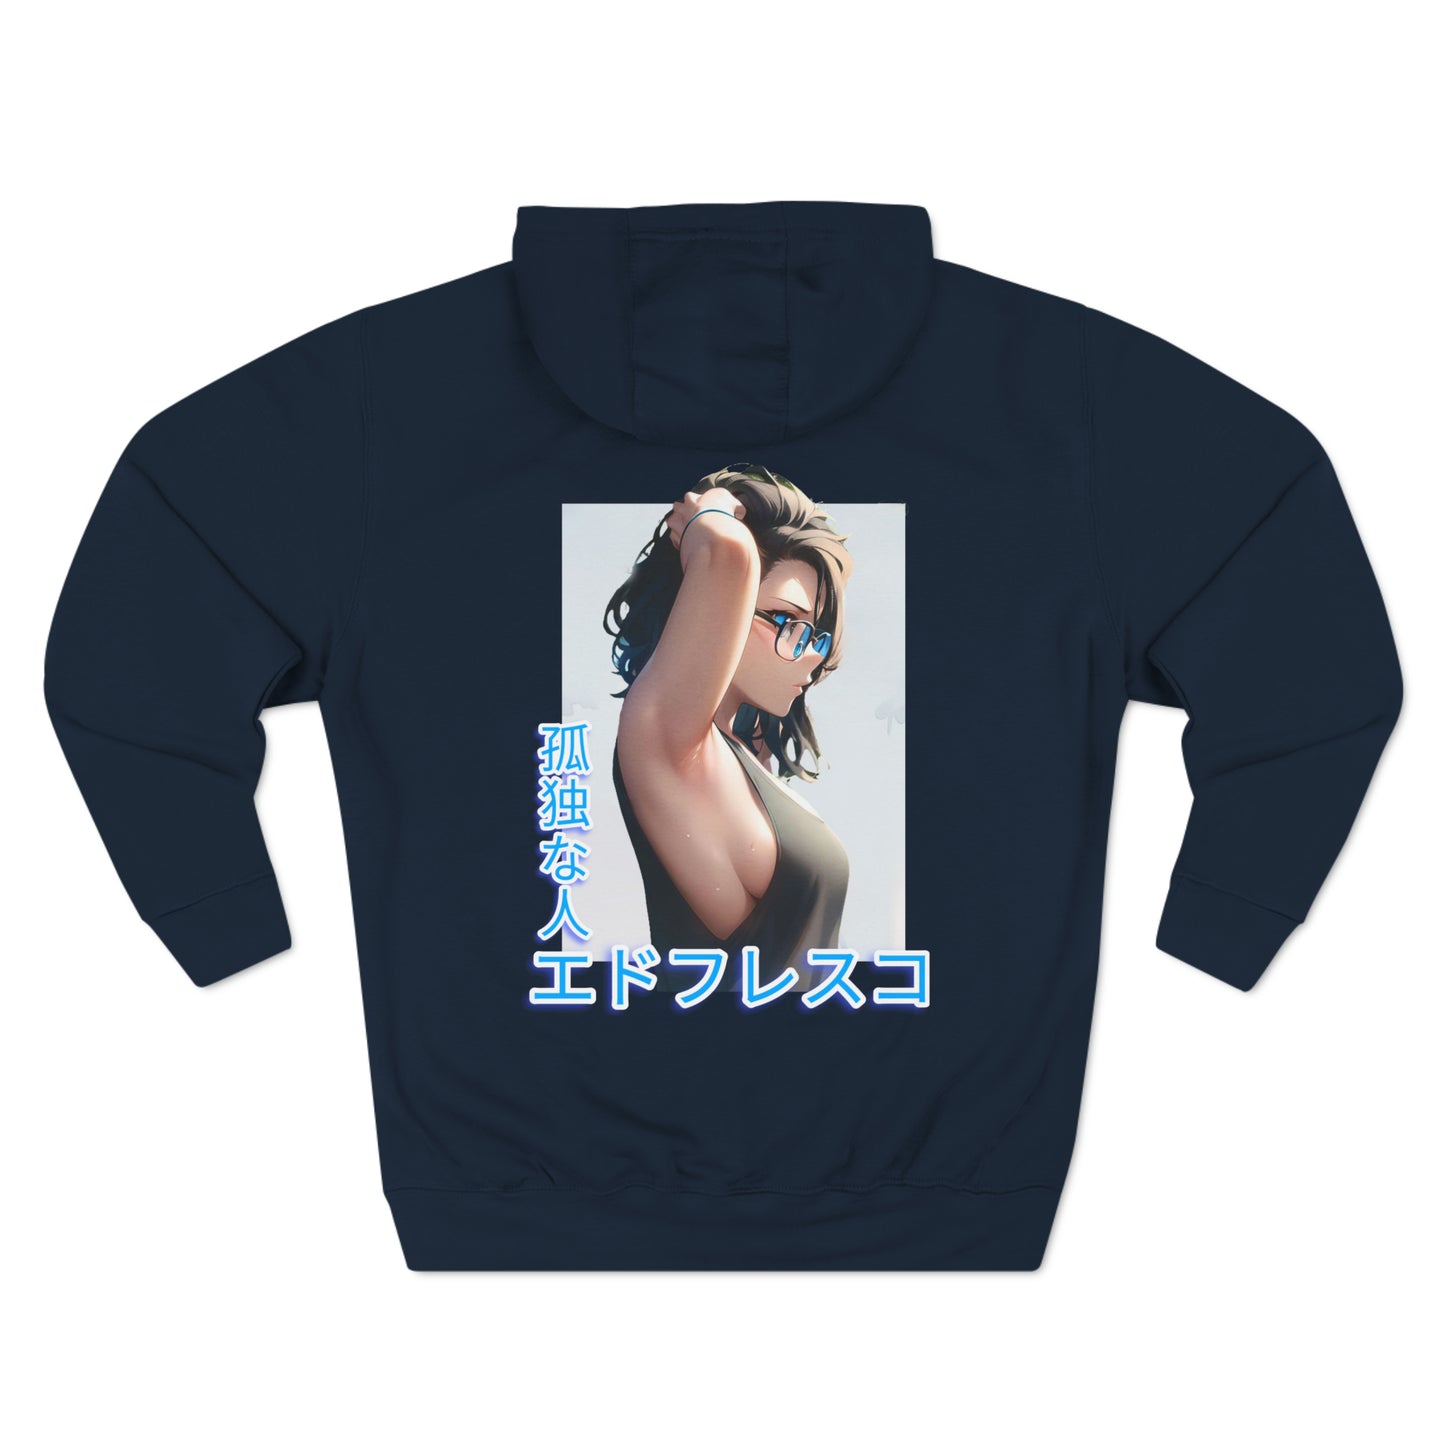 Anime Style Art Three-Panel Fleece Hoodie- "Front Cover Chick"